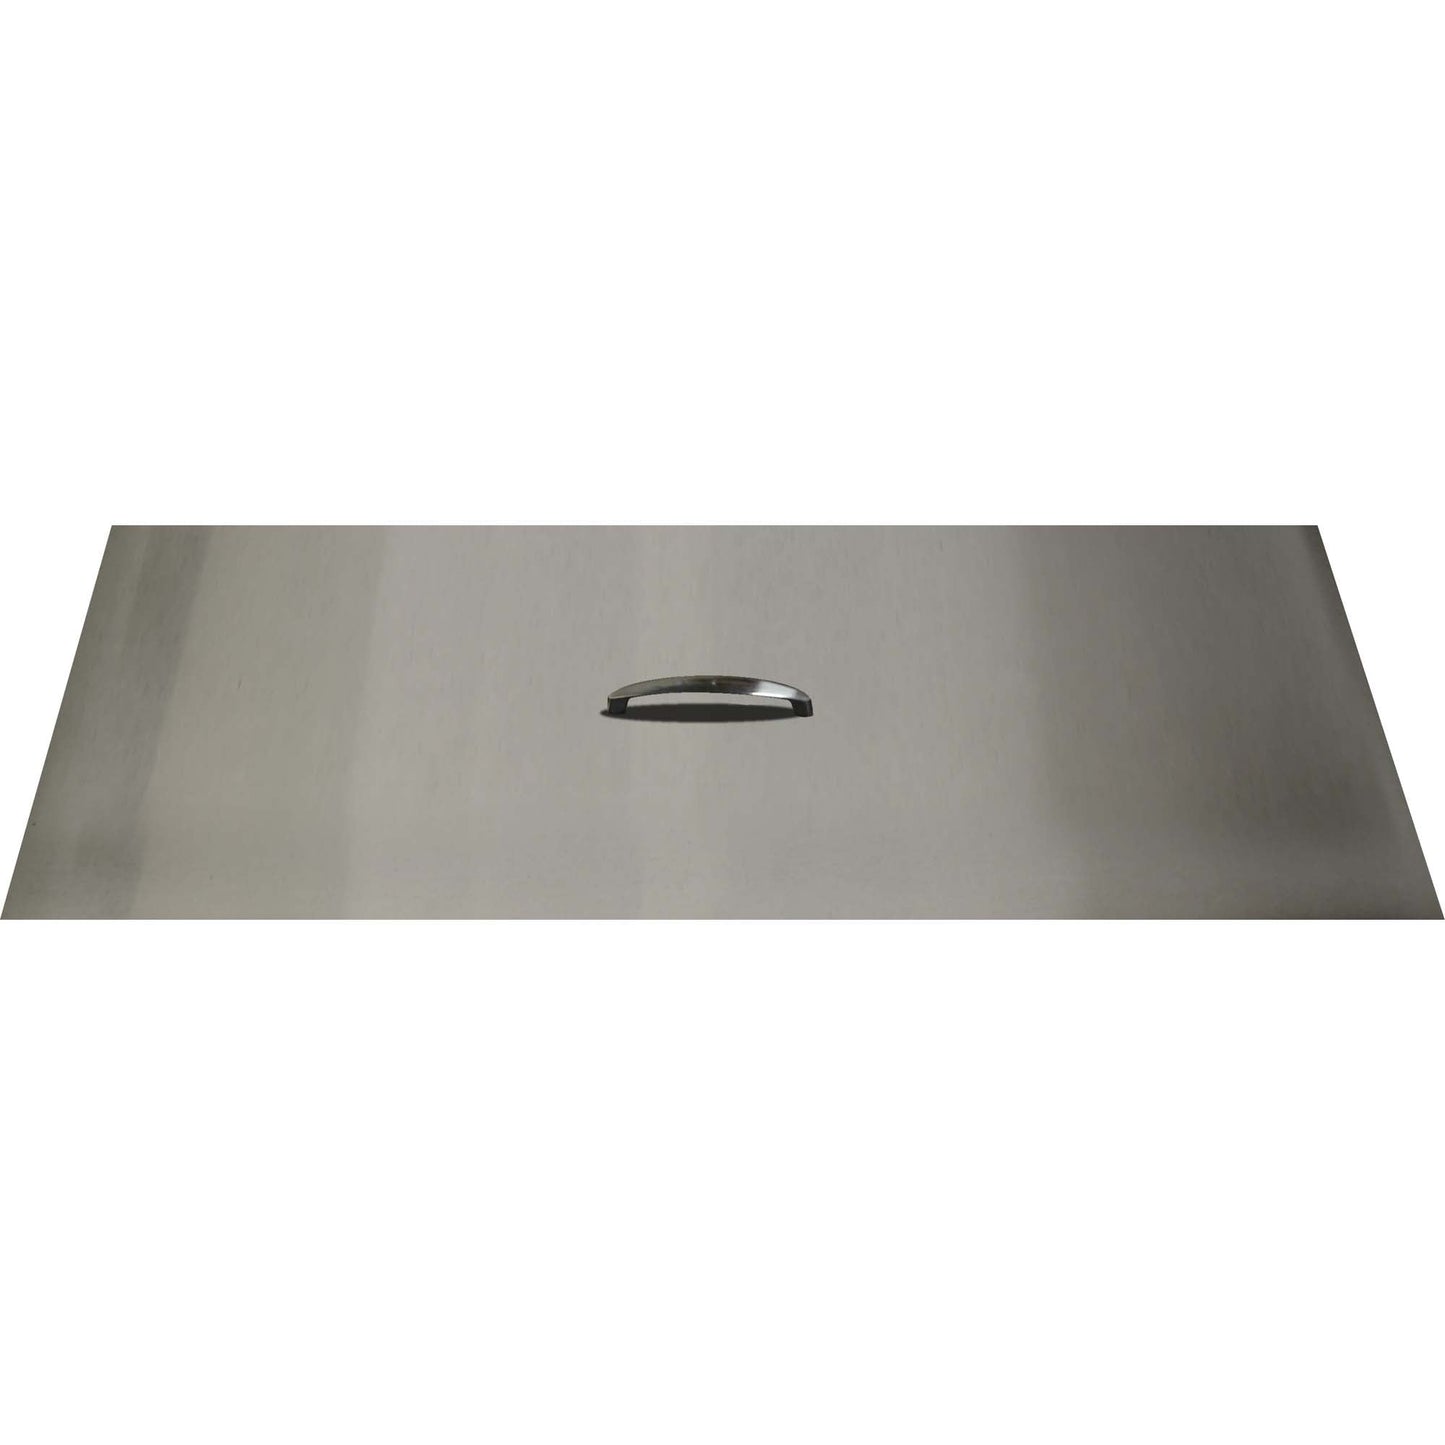 14" x 38" Rectangular Stainless Steel Cover - Stainless Steel Handle-Novel Home